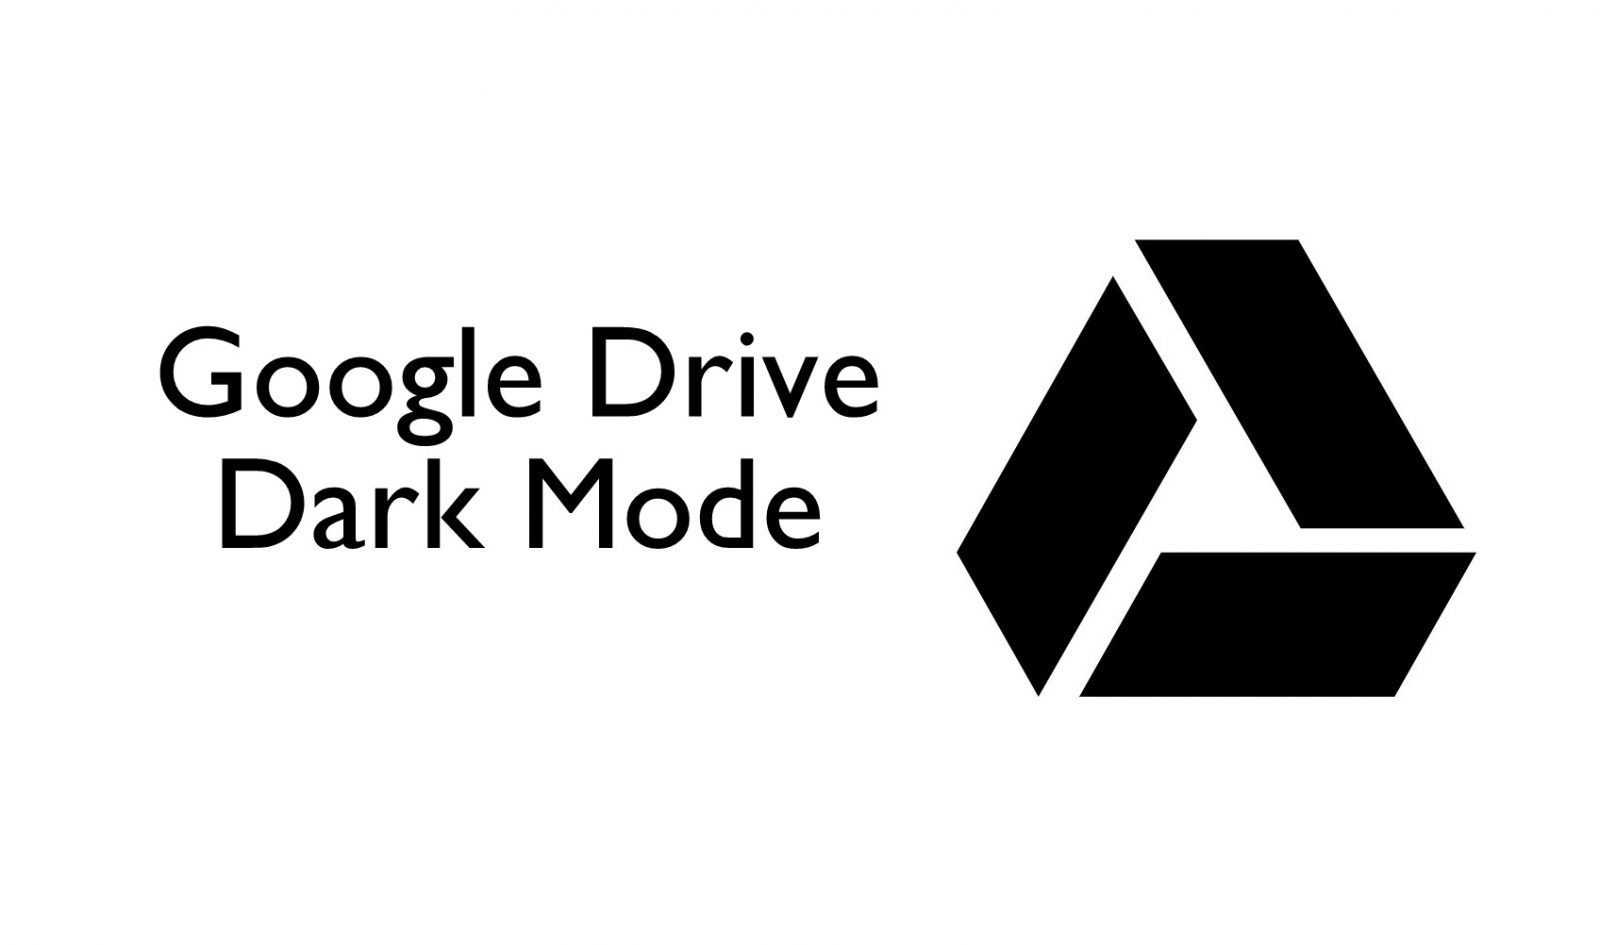 is there a way to make google drive dark mode